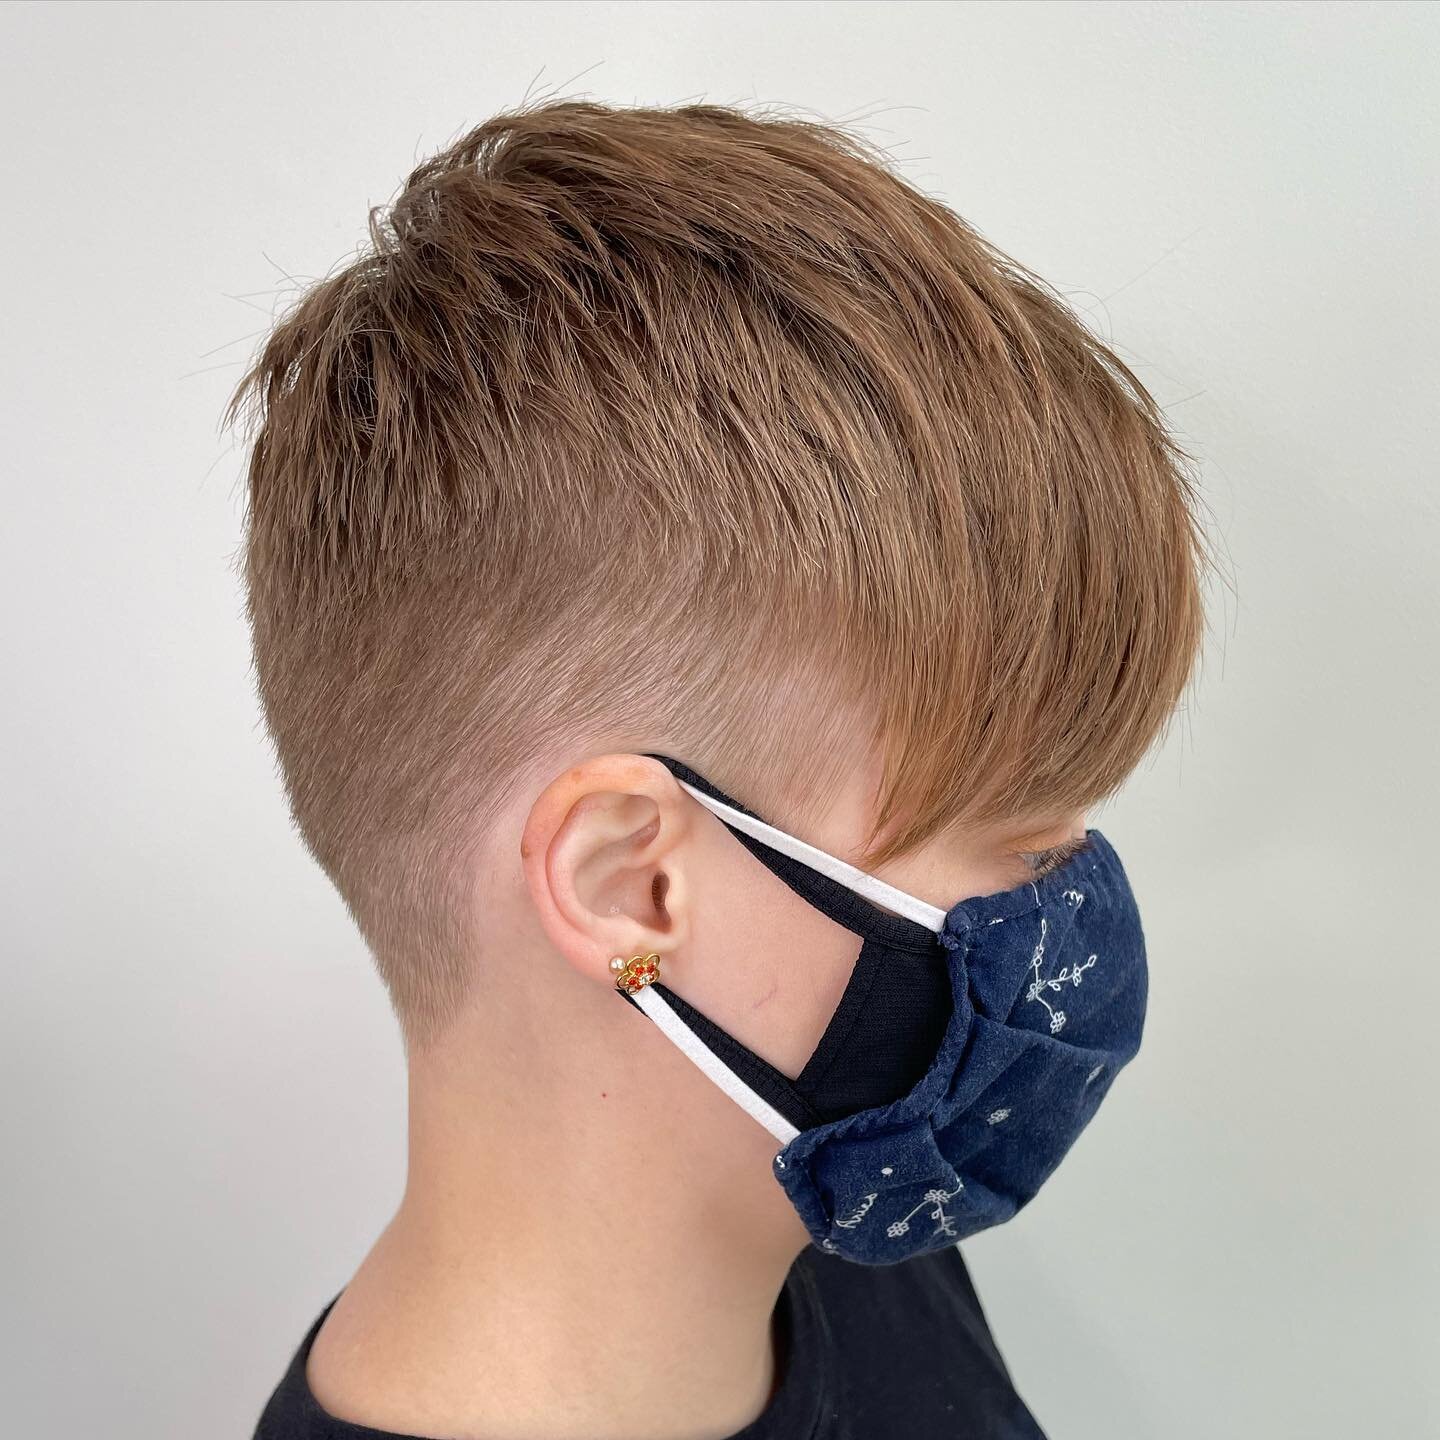 👨🏻&zwj;🎤 Let your hair do the talking. 

This short faded pixie haircut by @hair.by.fox will be so much easier to manage. Less hair getting caught up in masks is an added bonus.

#shortcuts #genderneutralcuts #sepdx #kitsunesalonpdx #crestonkenilw